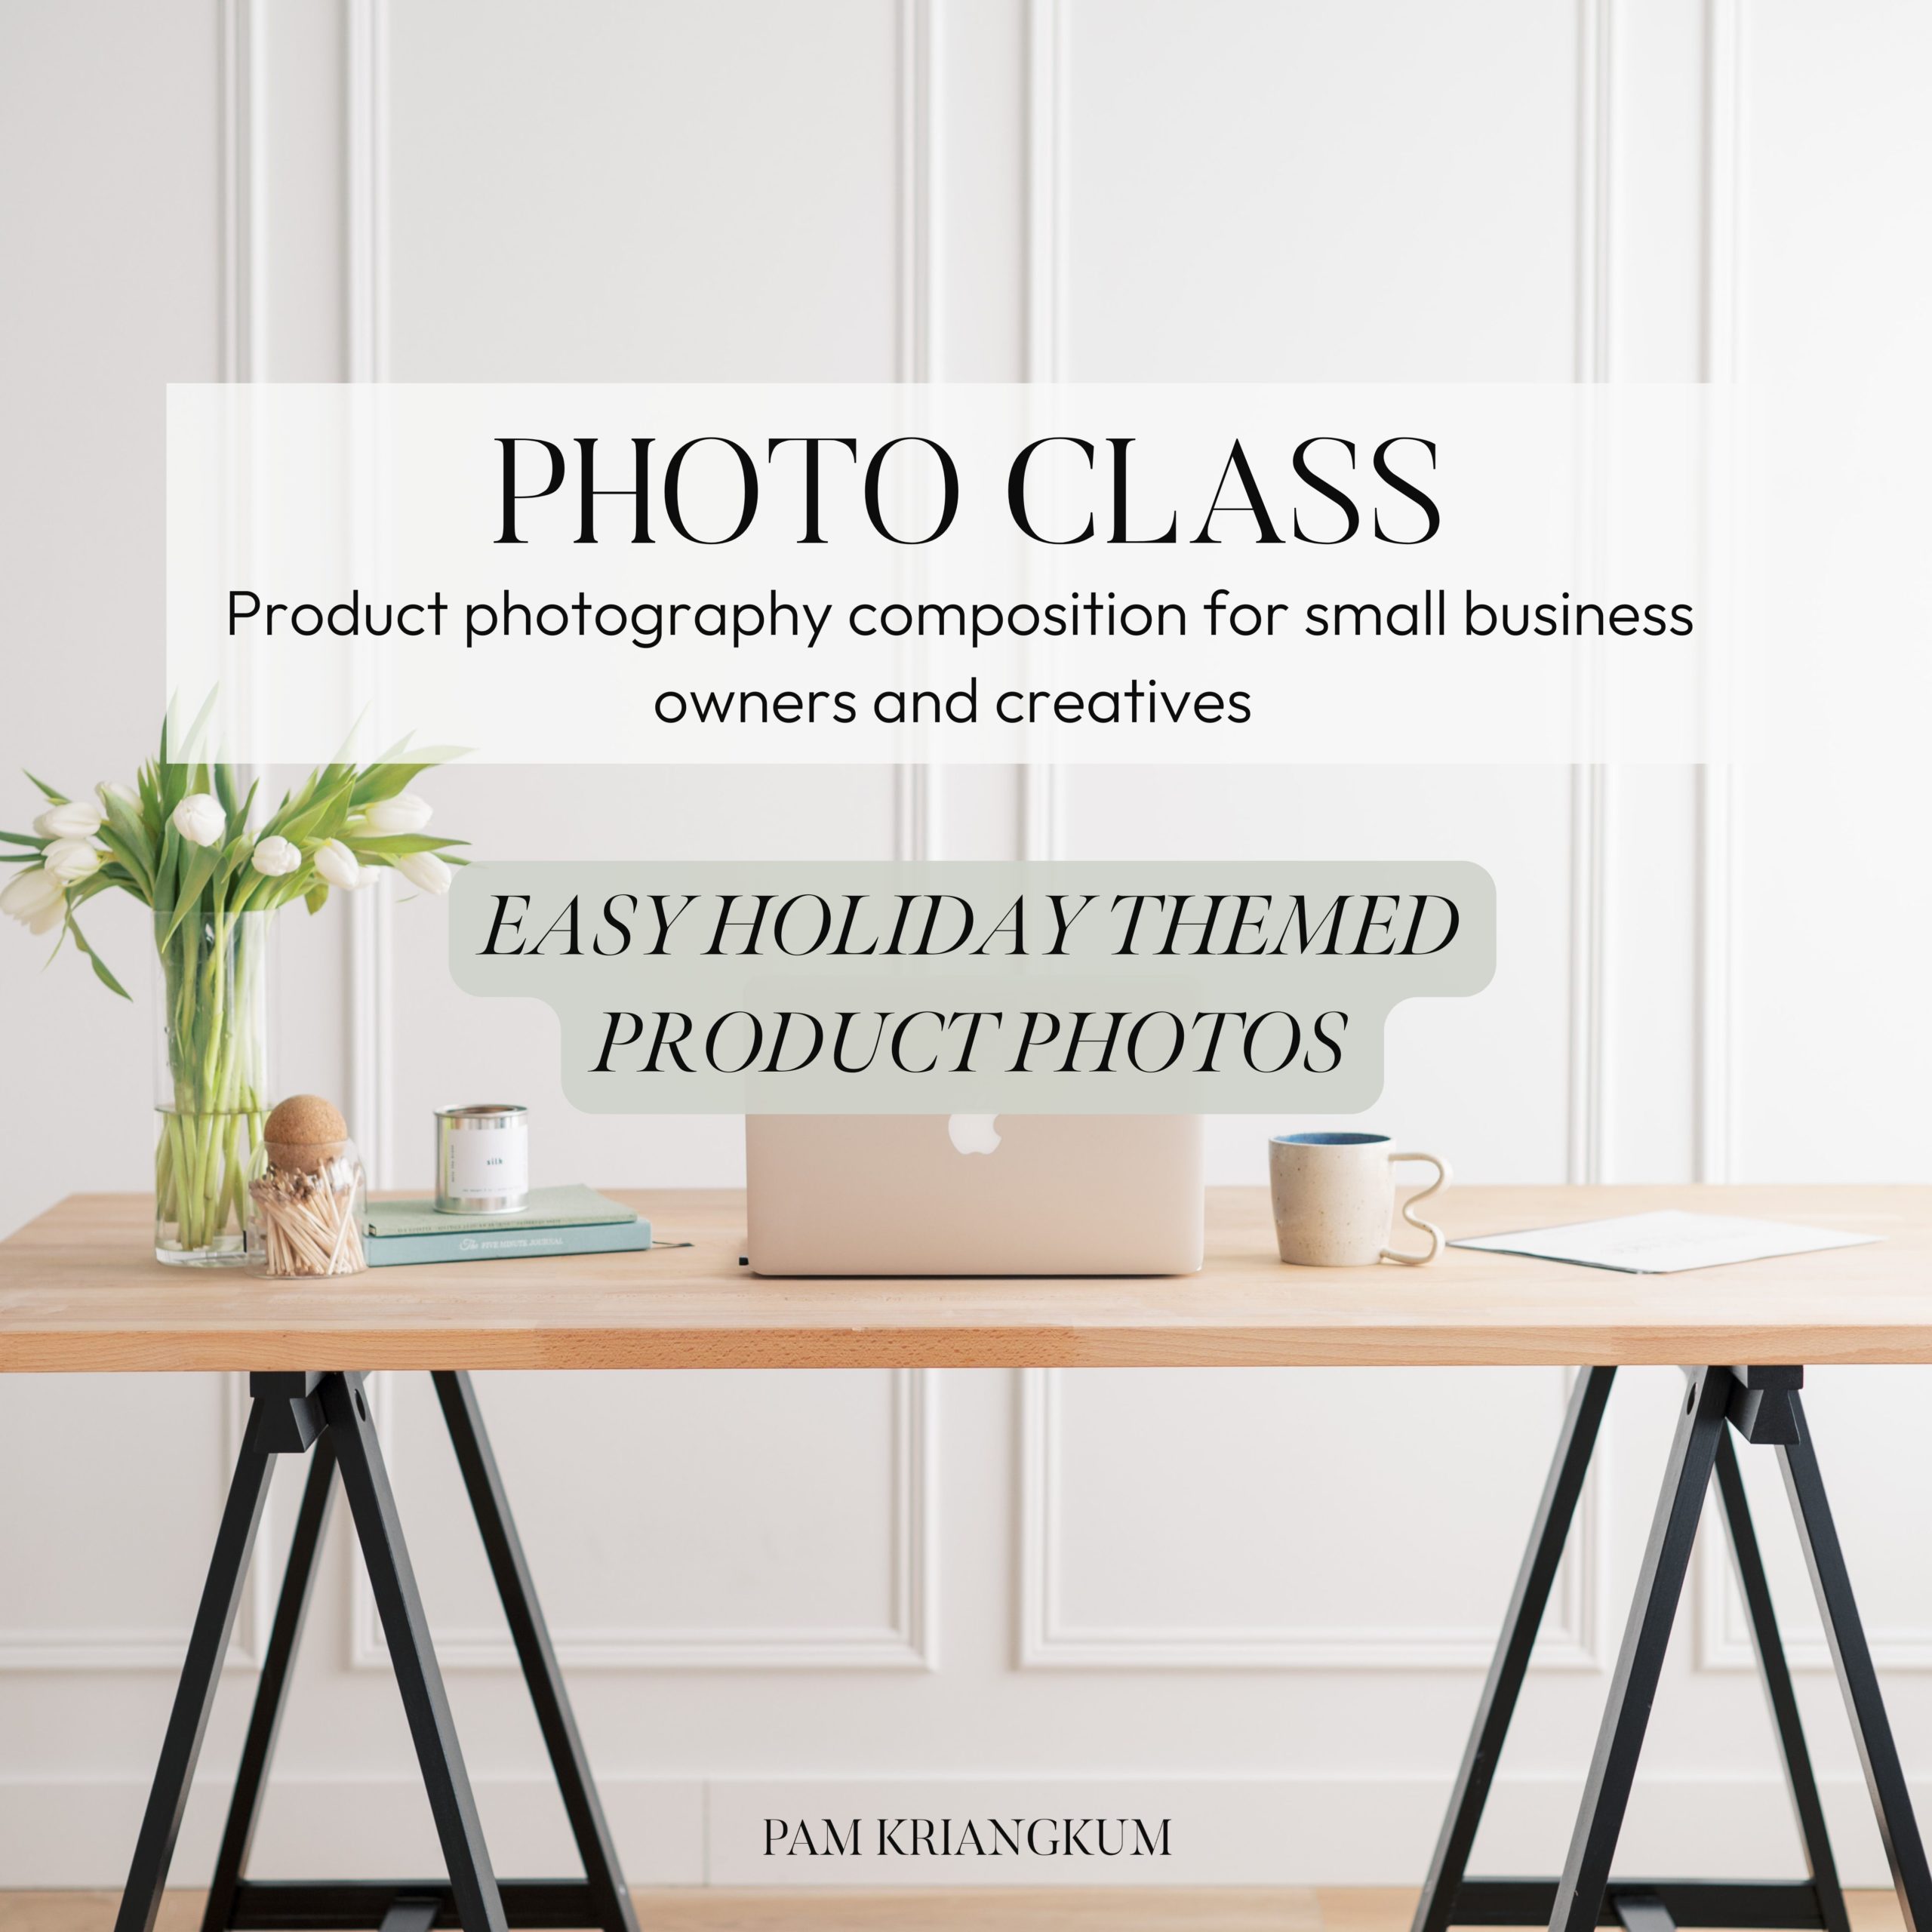 Easy Holiday Product Photos